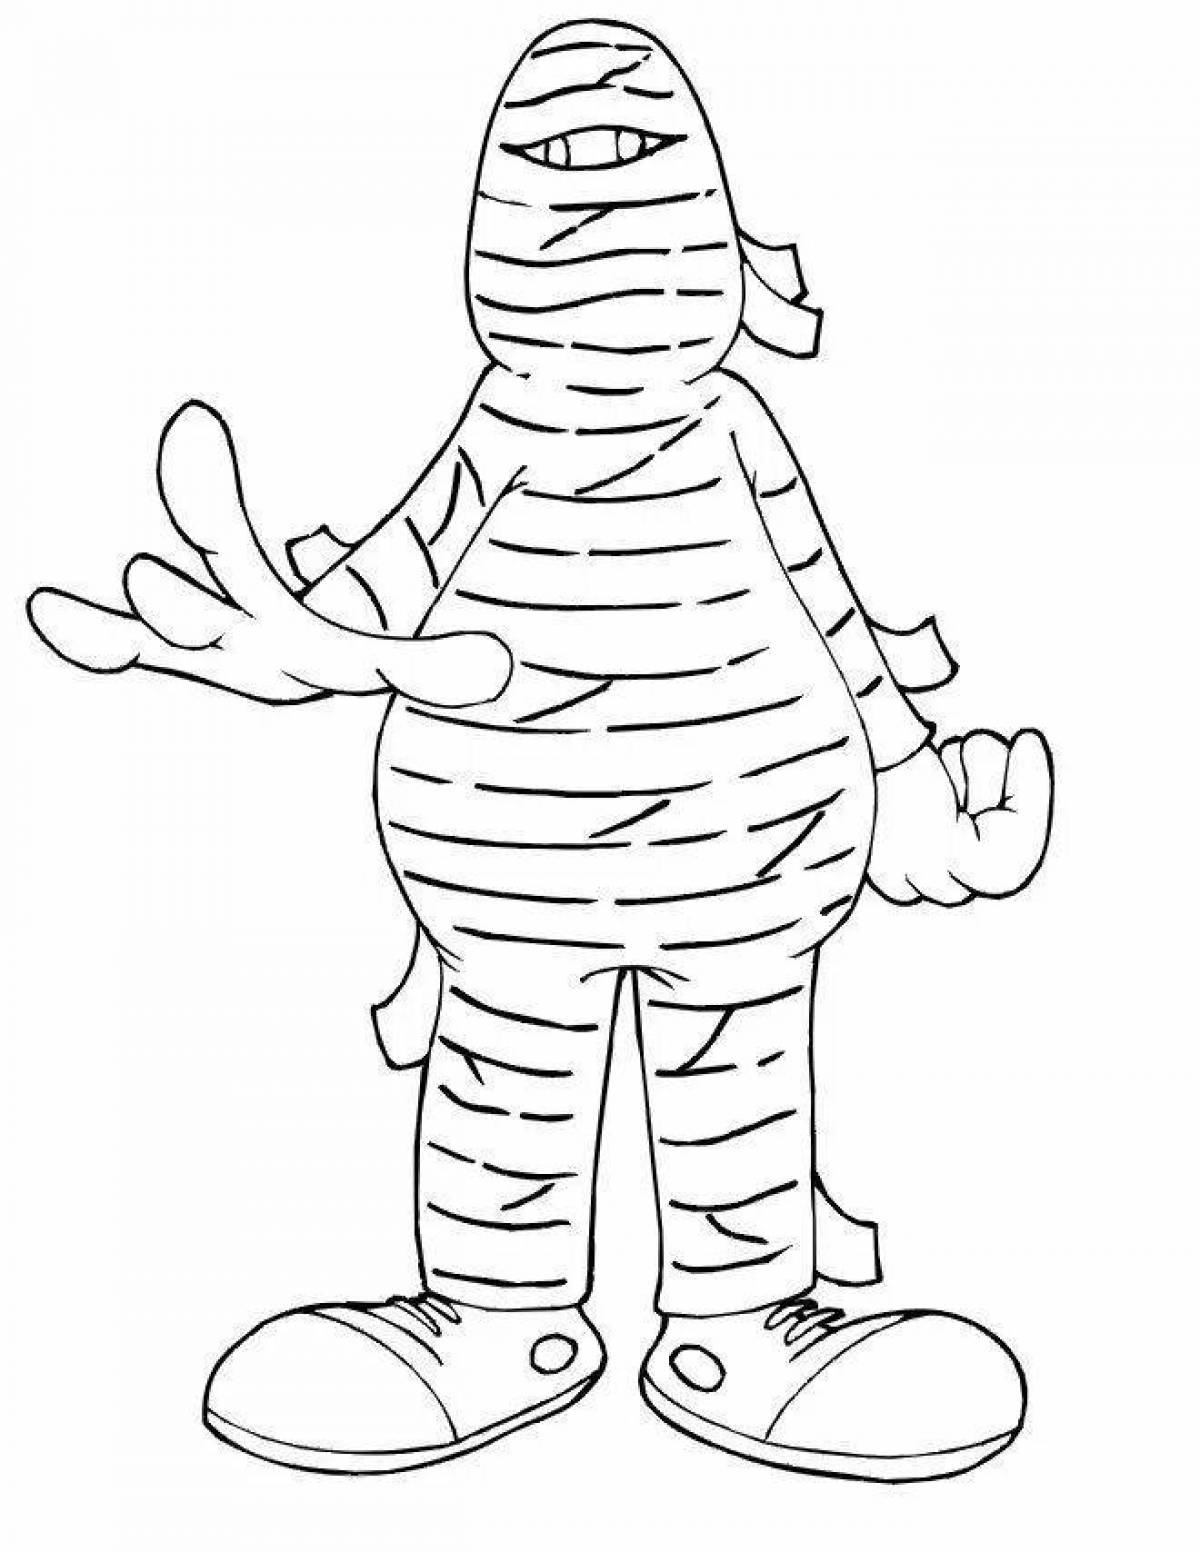 Mummy chilling coloring page